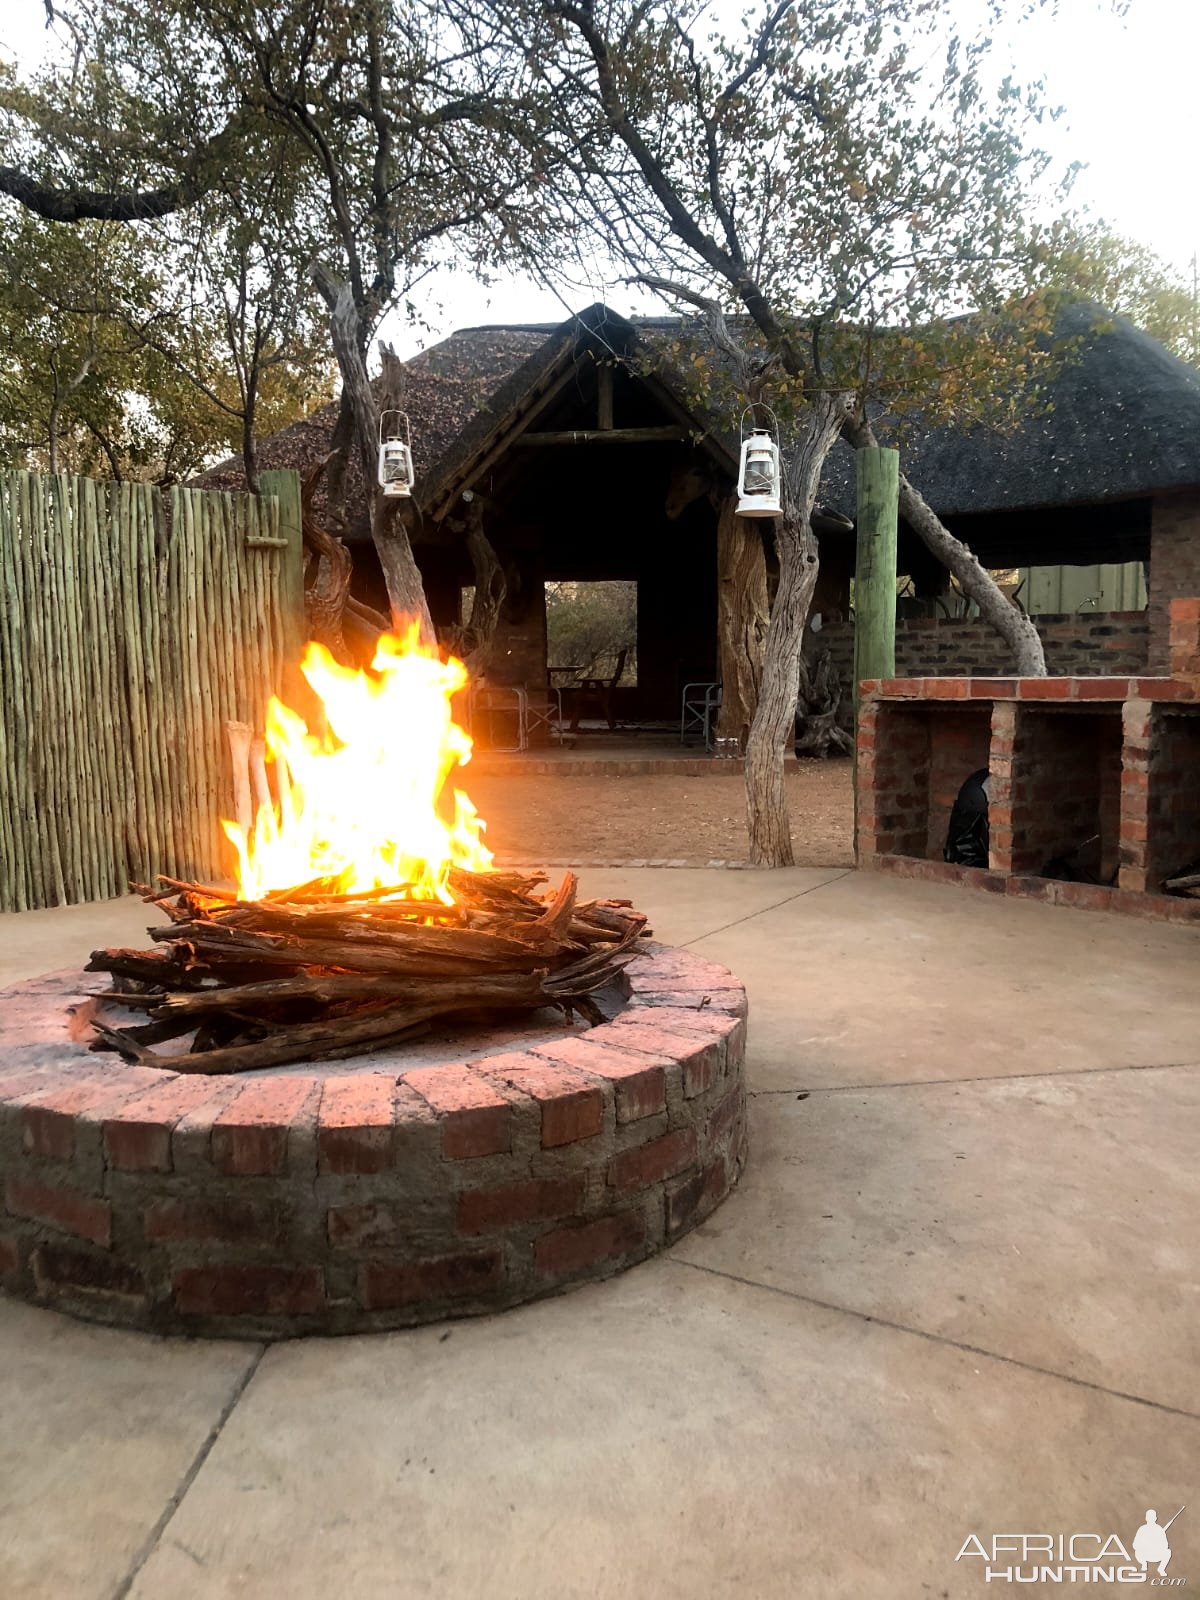 Tented Camp Limpopo